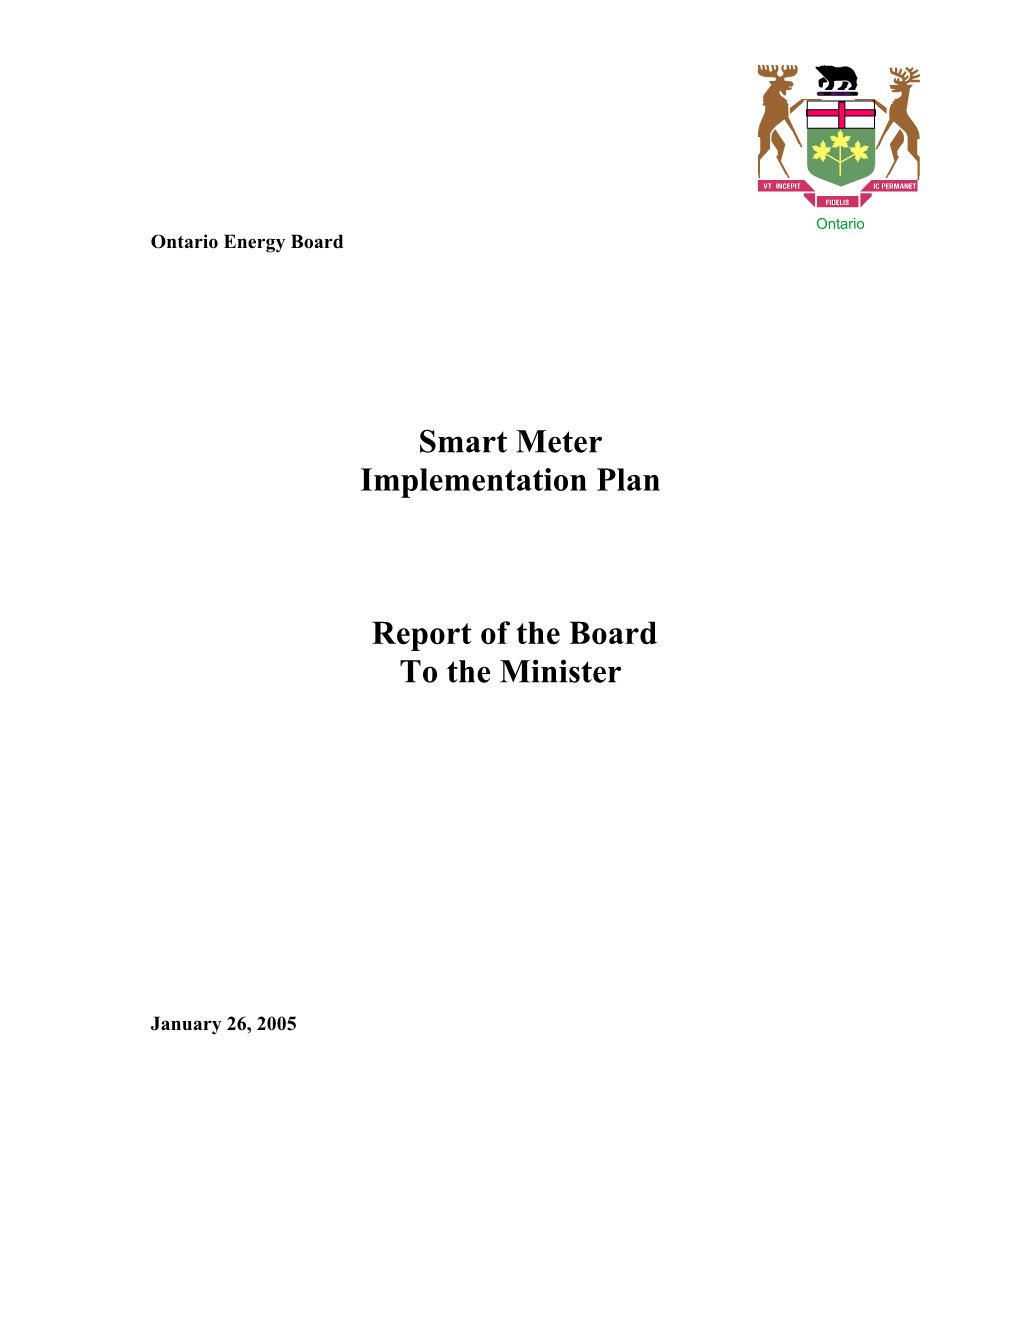 Smart Meter Implementation Plan Report of the Board to the Minister